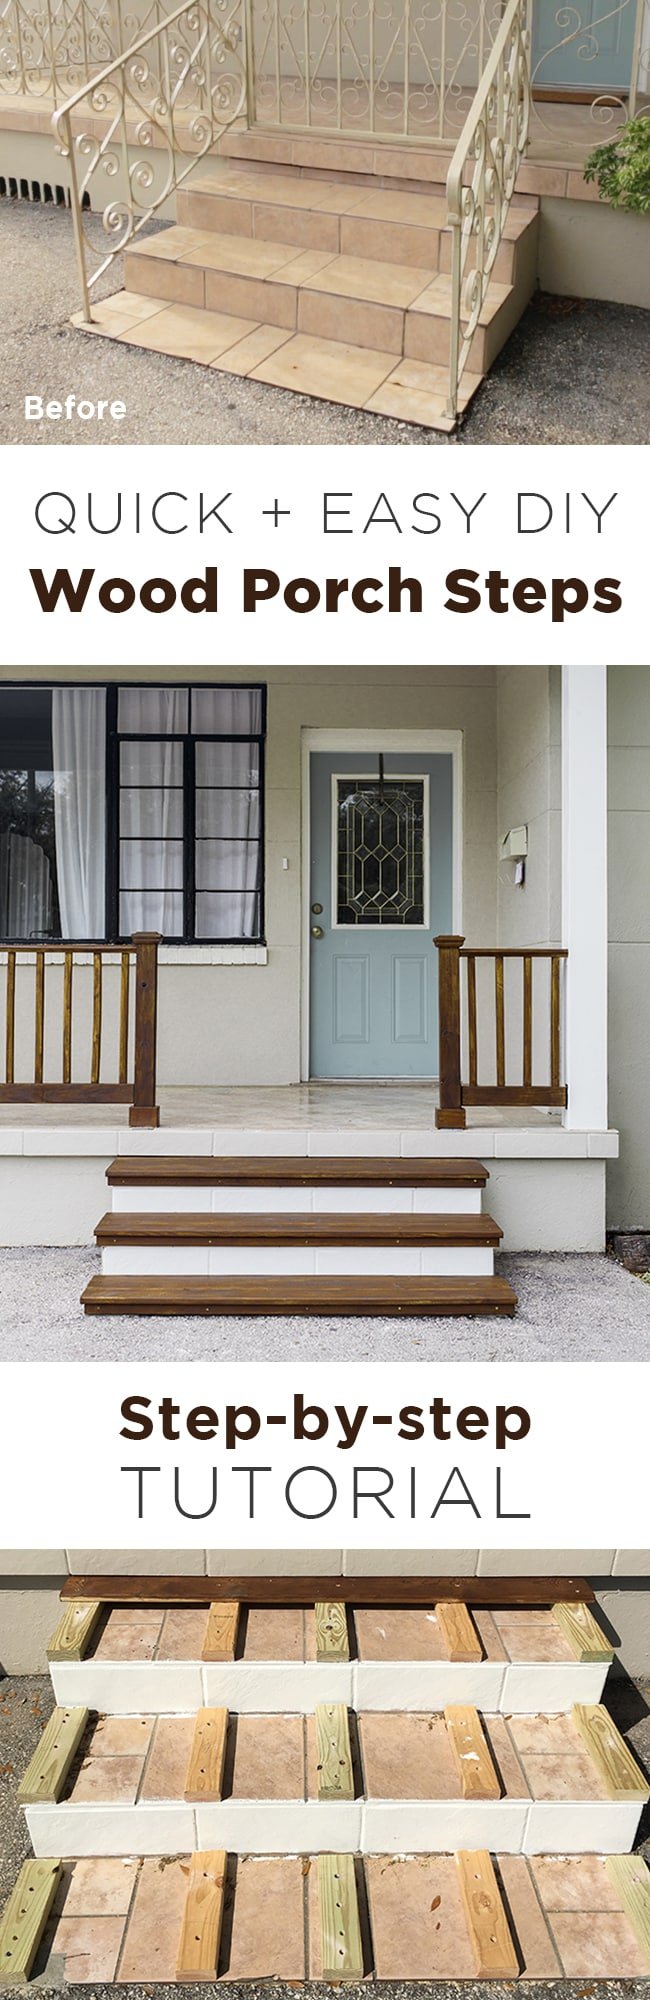 Simple Diy Wood Porch Steps Makeover, How To Build Patio Steps With Wood